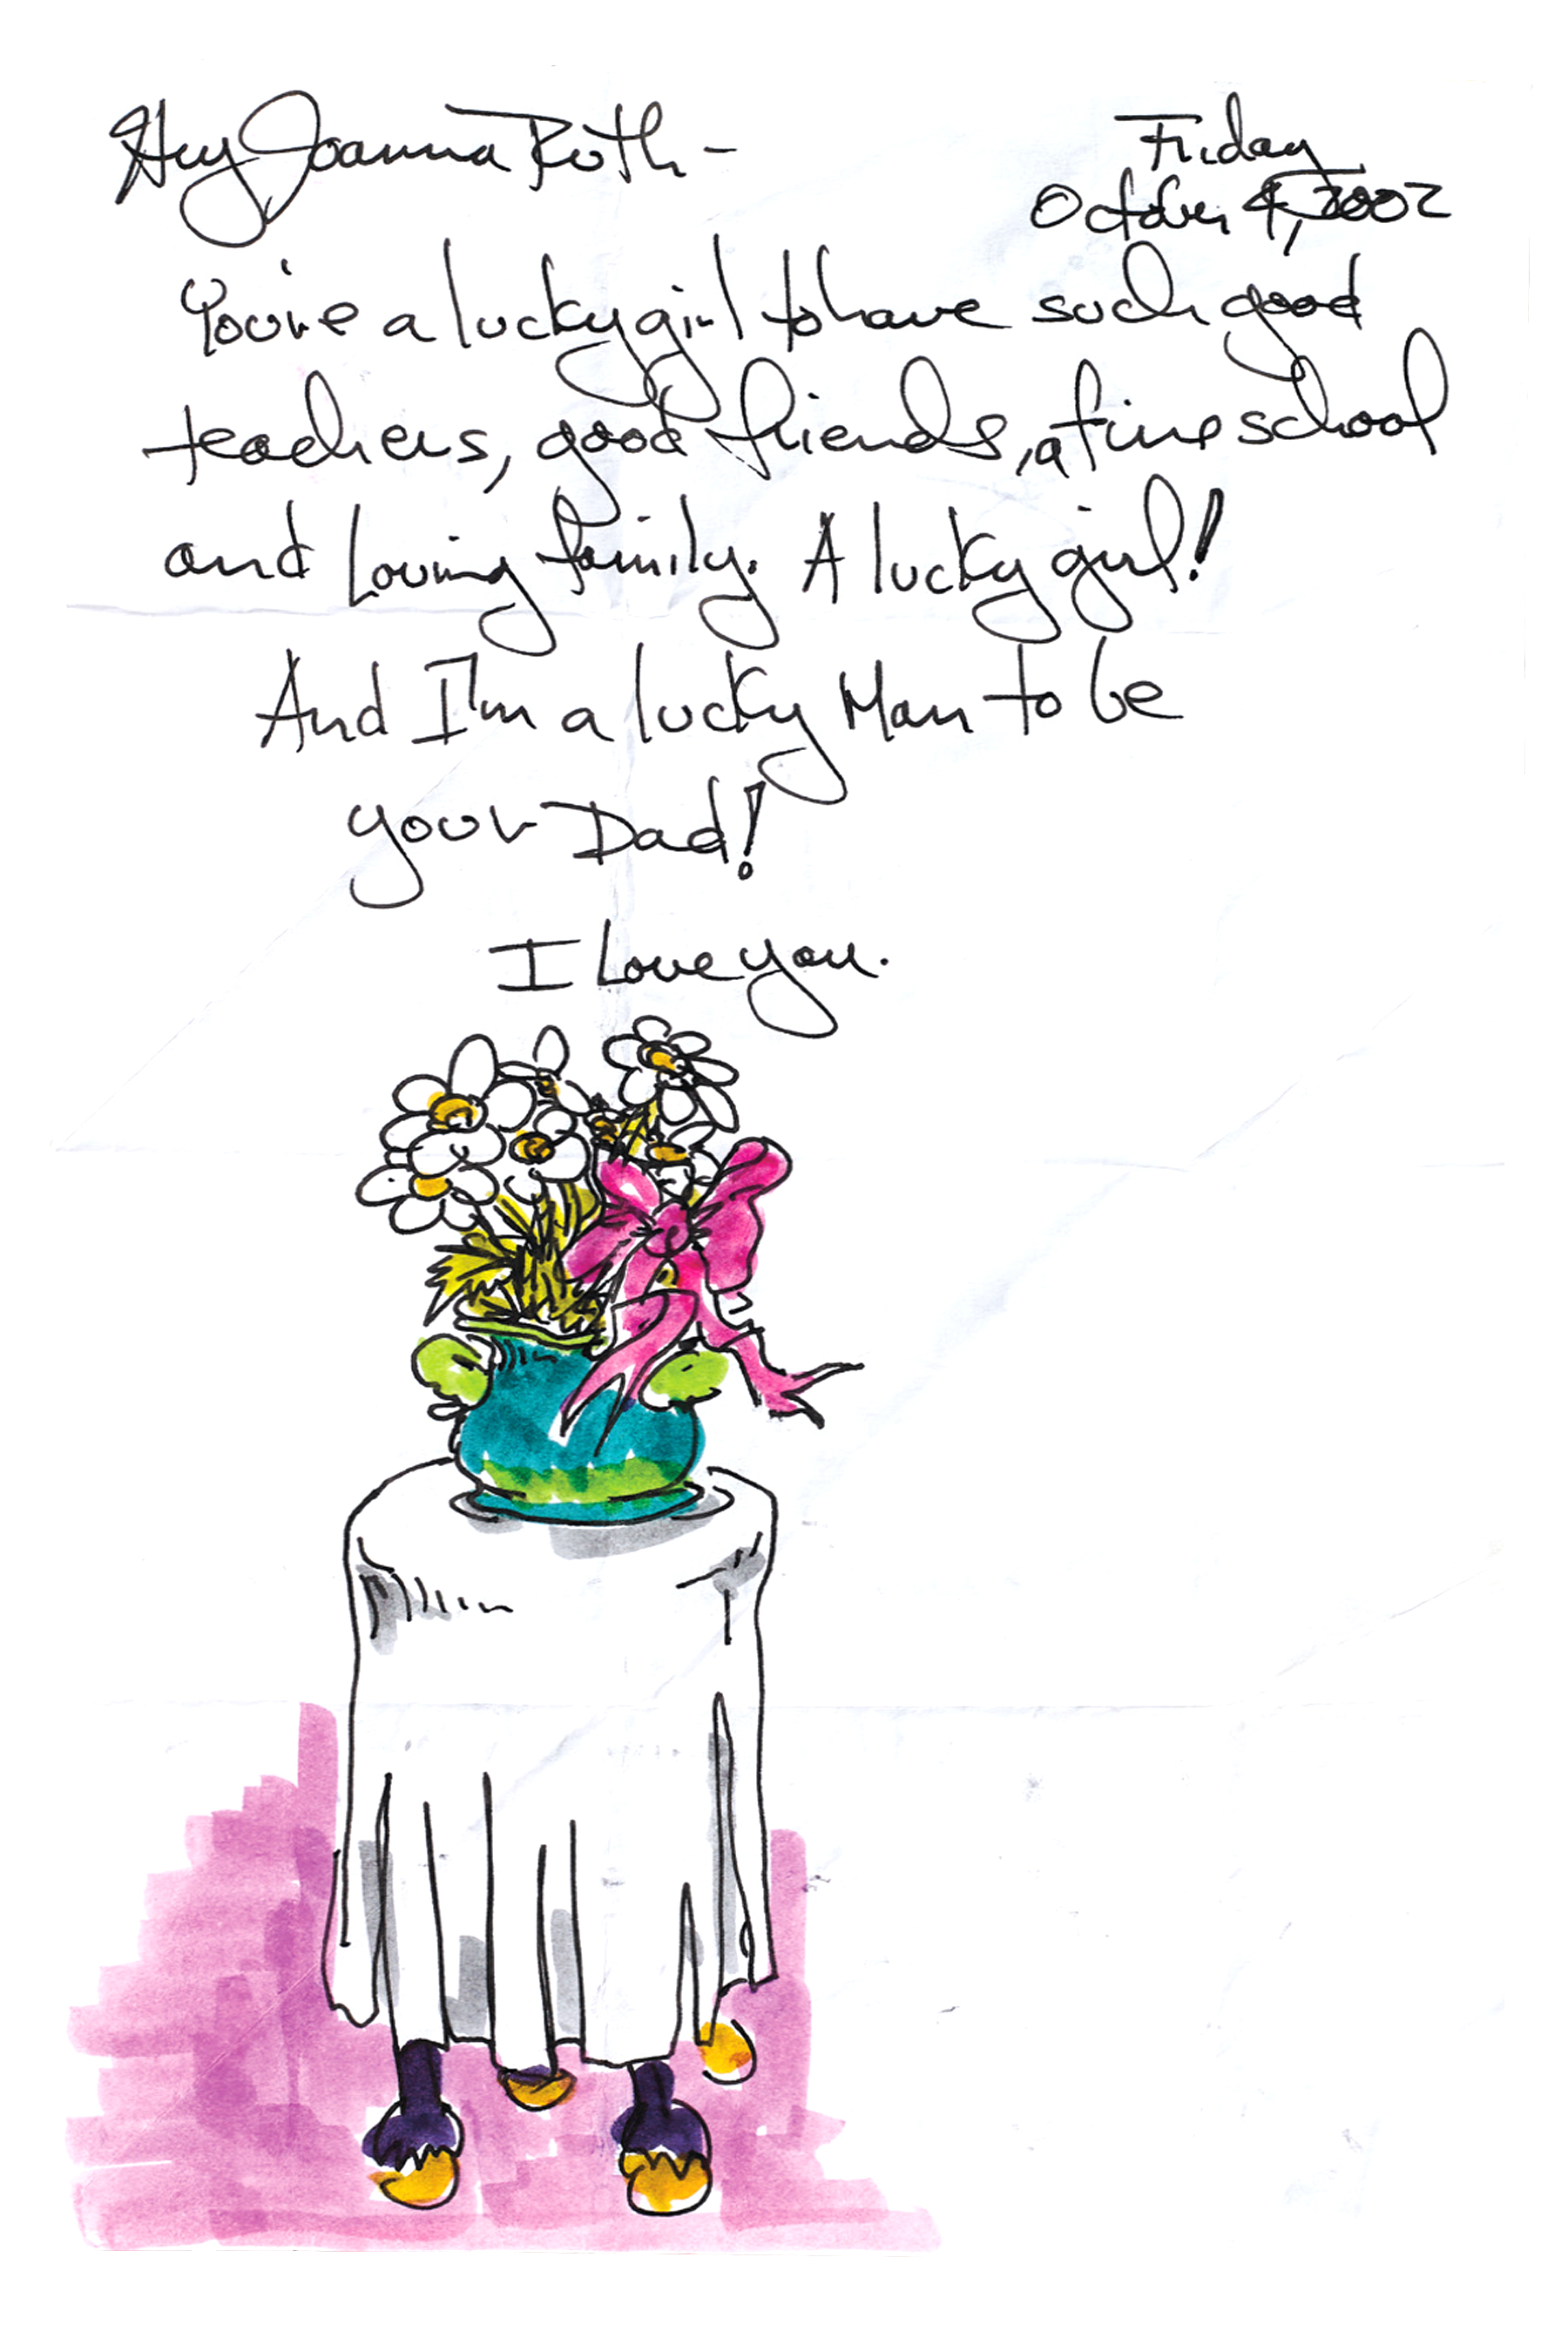 A handwritten note expressing love and gratitude, accompanied by a whimsical drawing of a colorful bouquet of flowers in a vase, placed on a draped table with shoes peeking out from underneath.